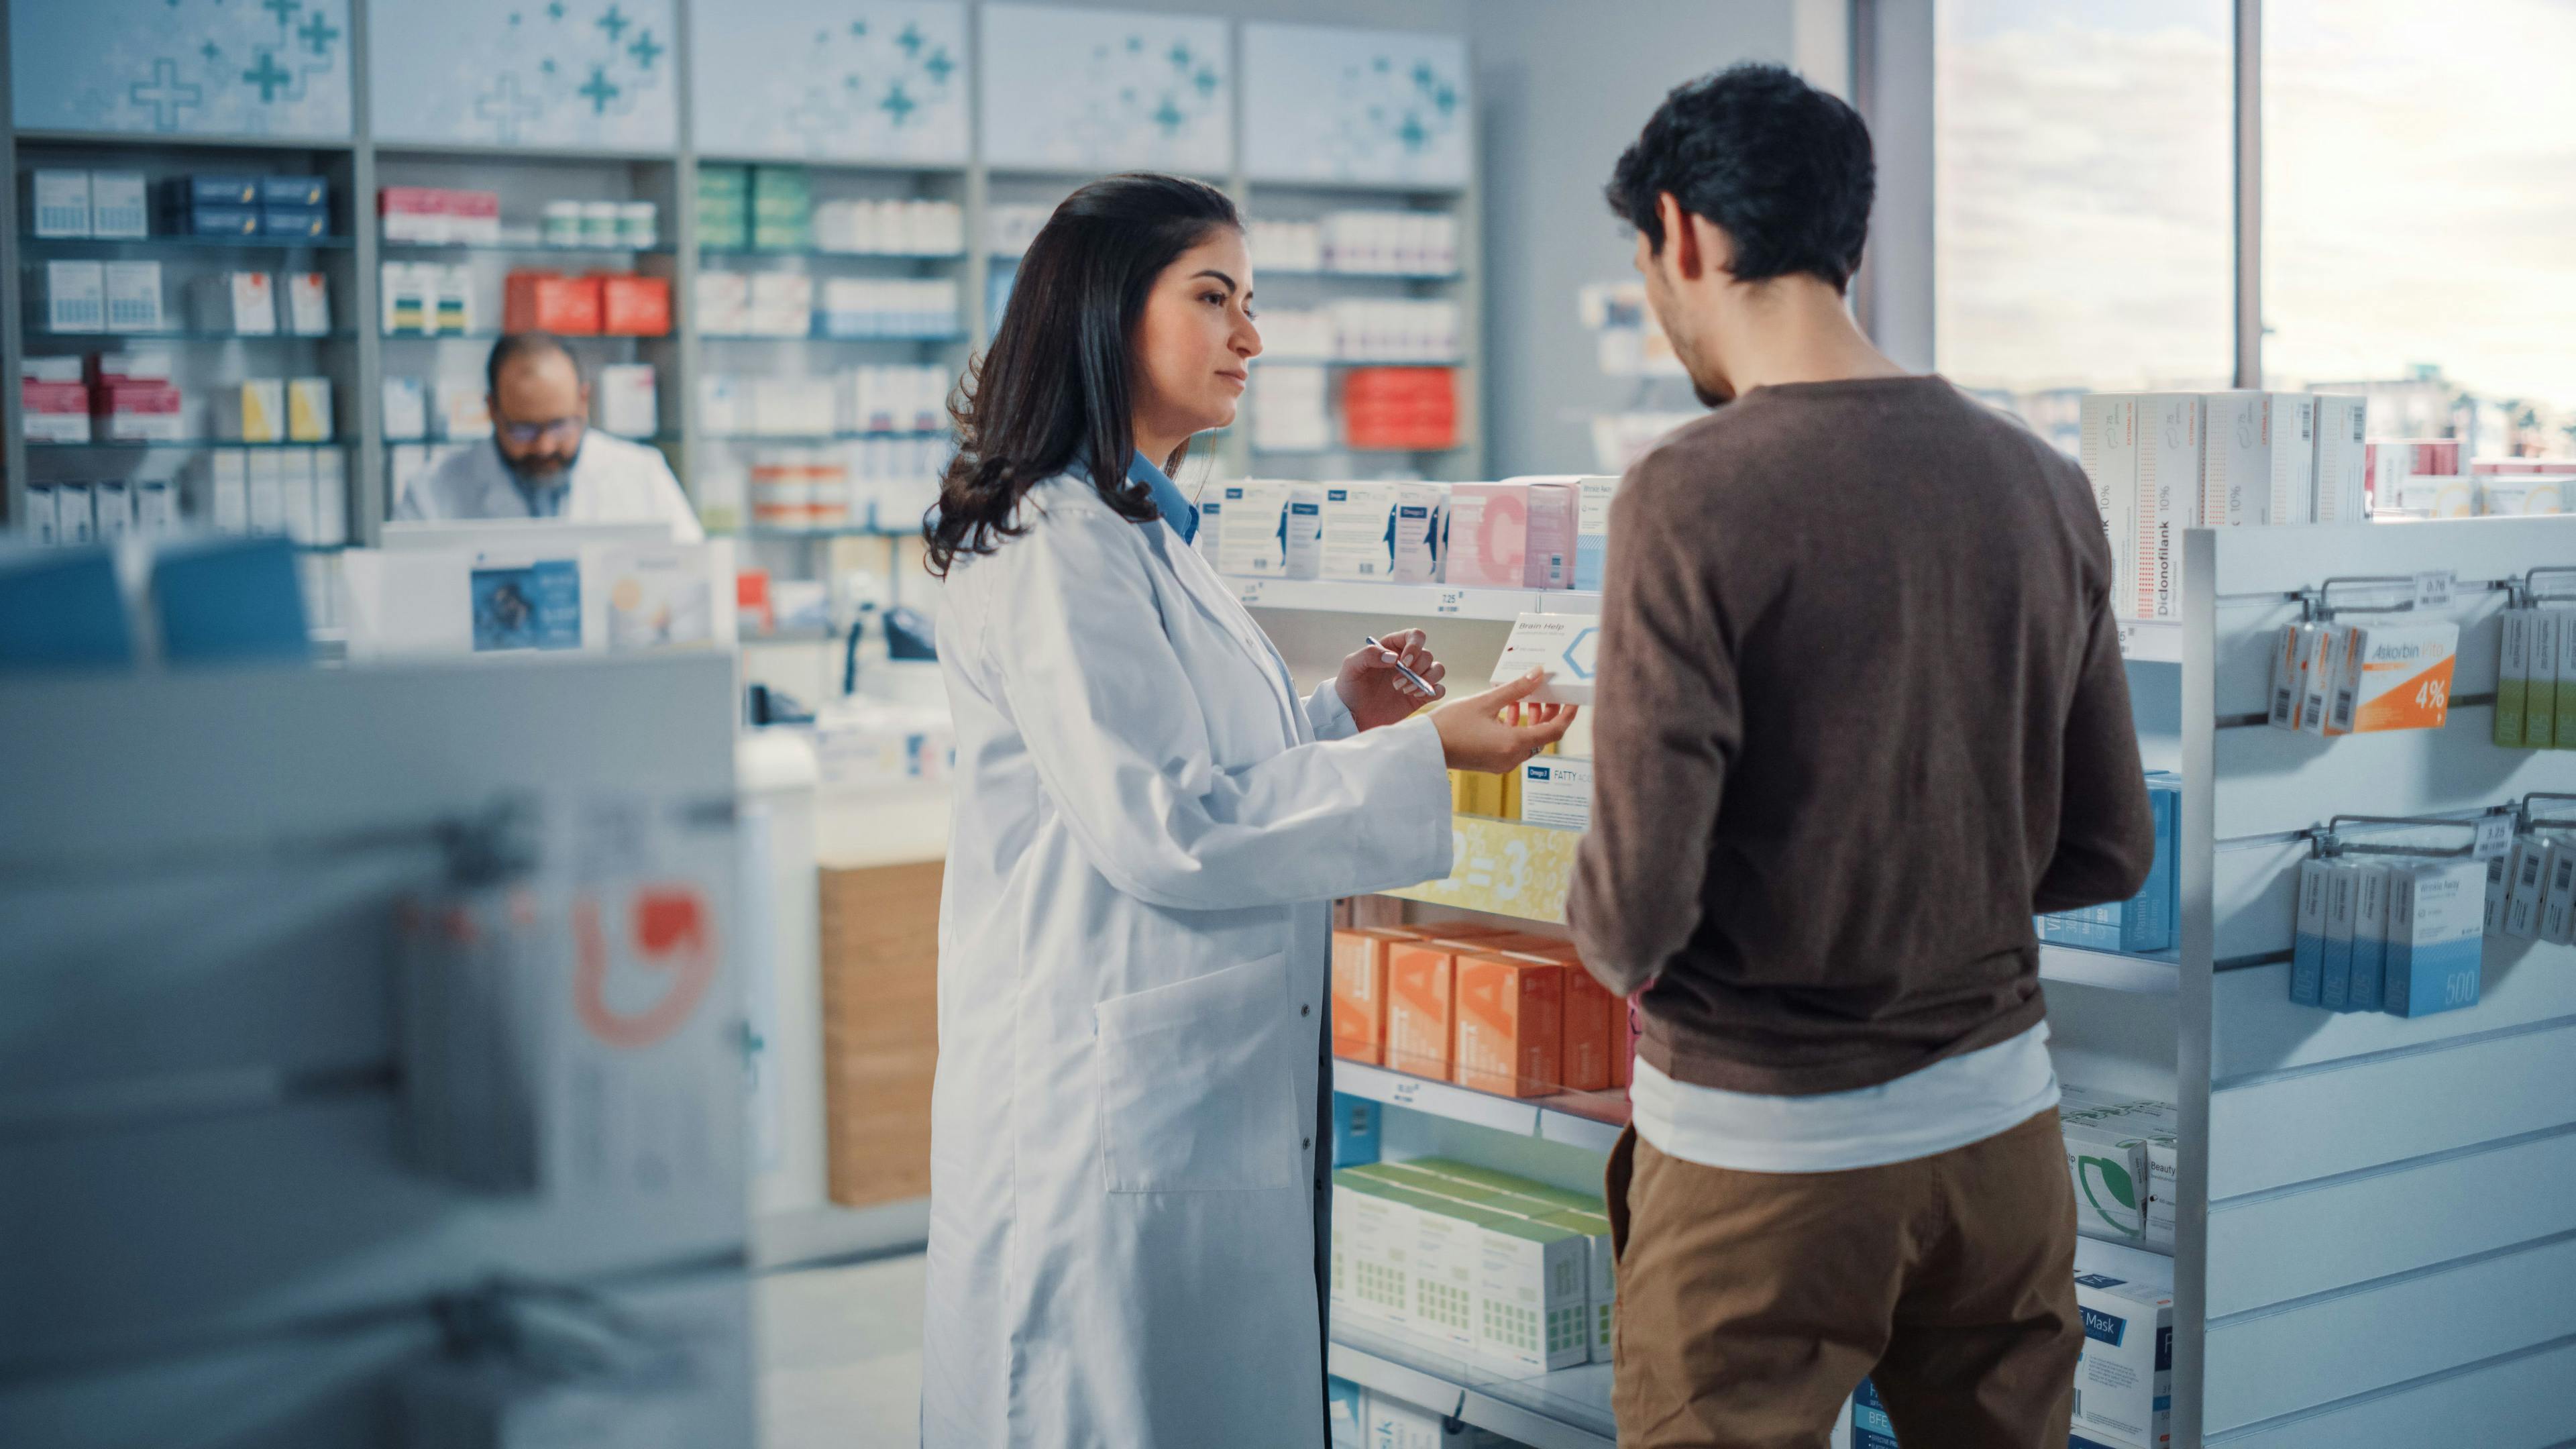 Pharmacy Drugstore: Hispanic Man Chooses to Buy Medicine, Drugs, Vitamins, Professional Female Pharmacist Helping Customer with Recommendation. Modern Pharma Store Shelves with Health Care